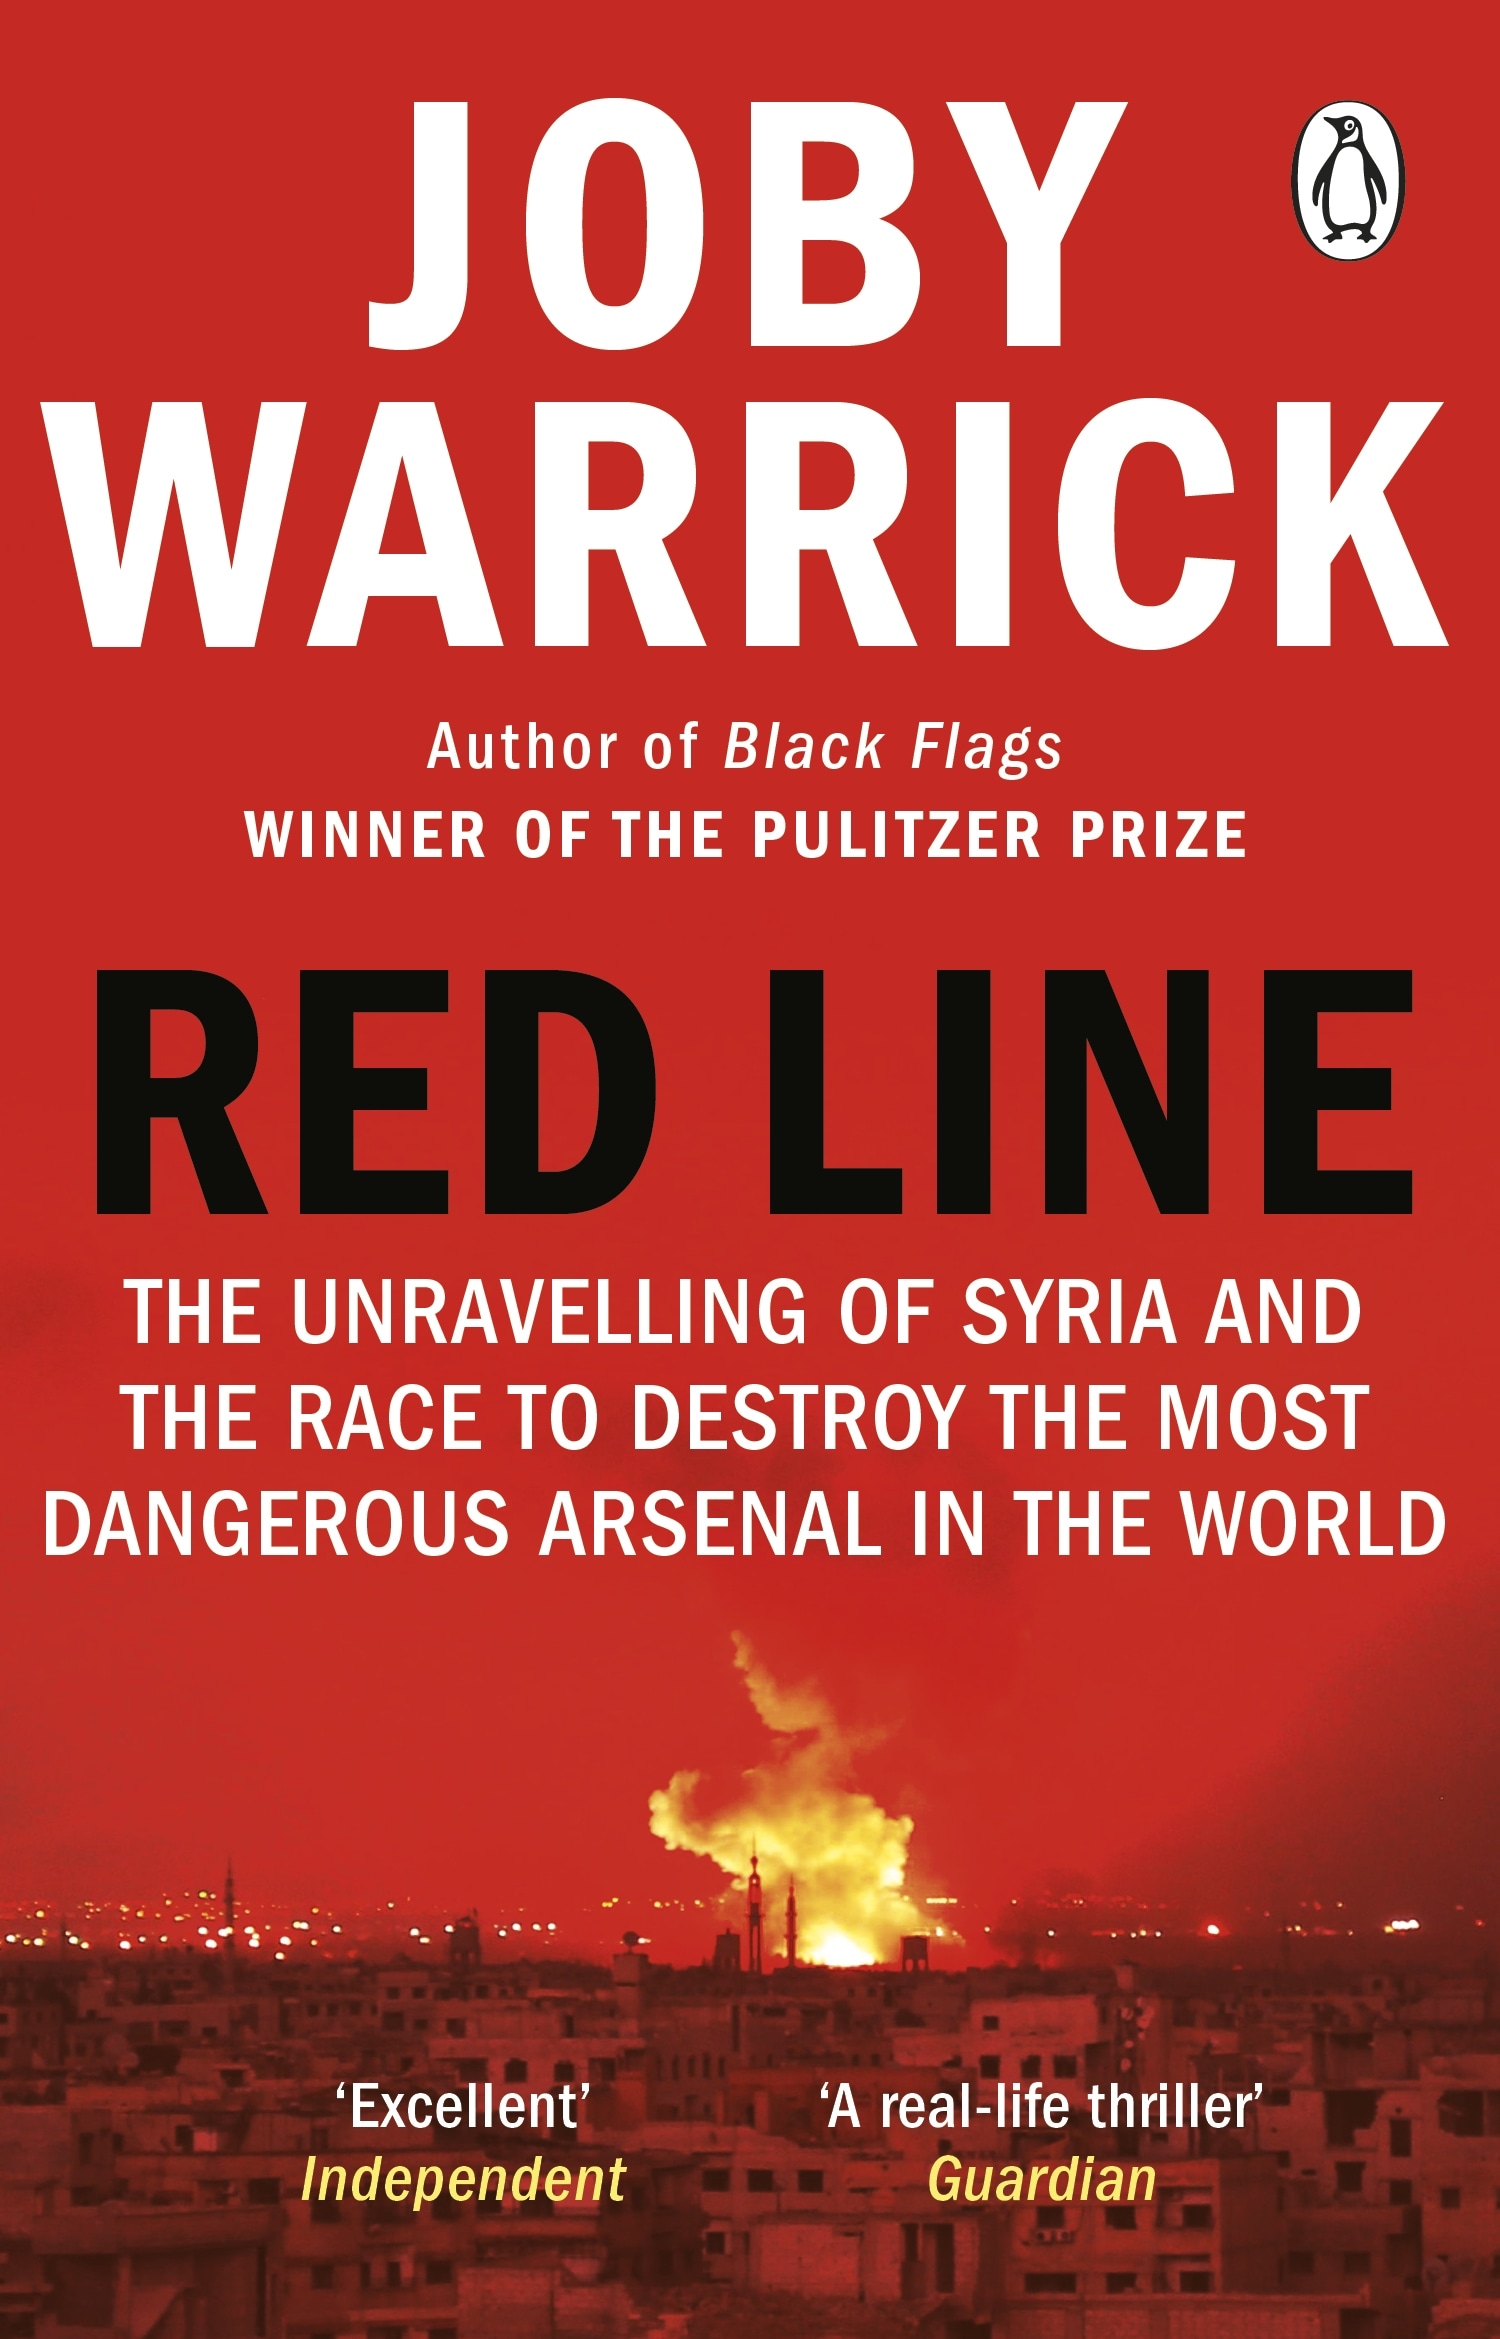 Book “Red Line” by Joby Warrick — February 24, 2022